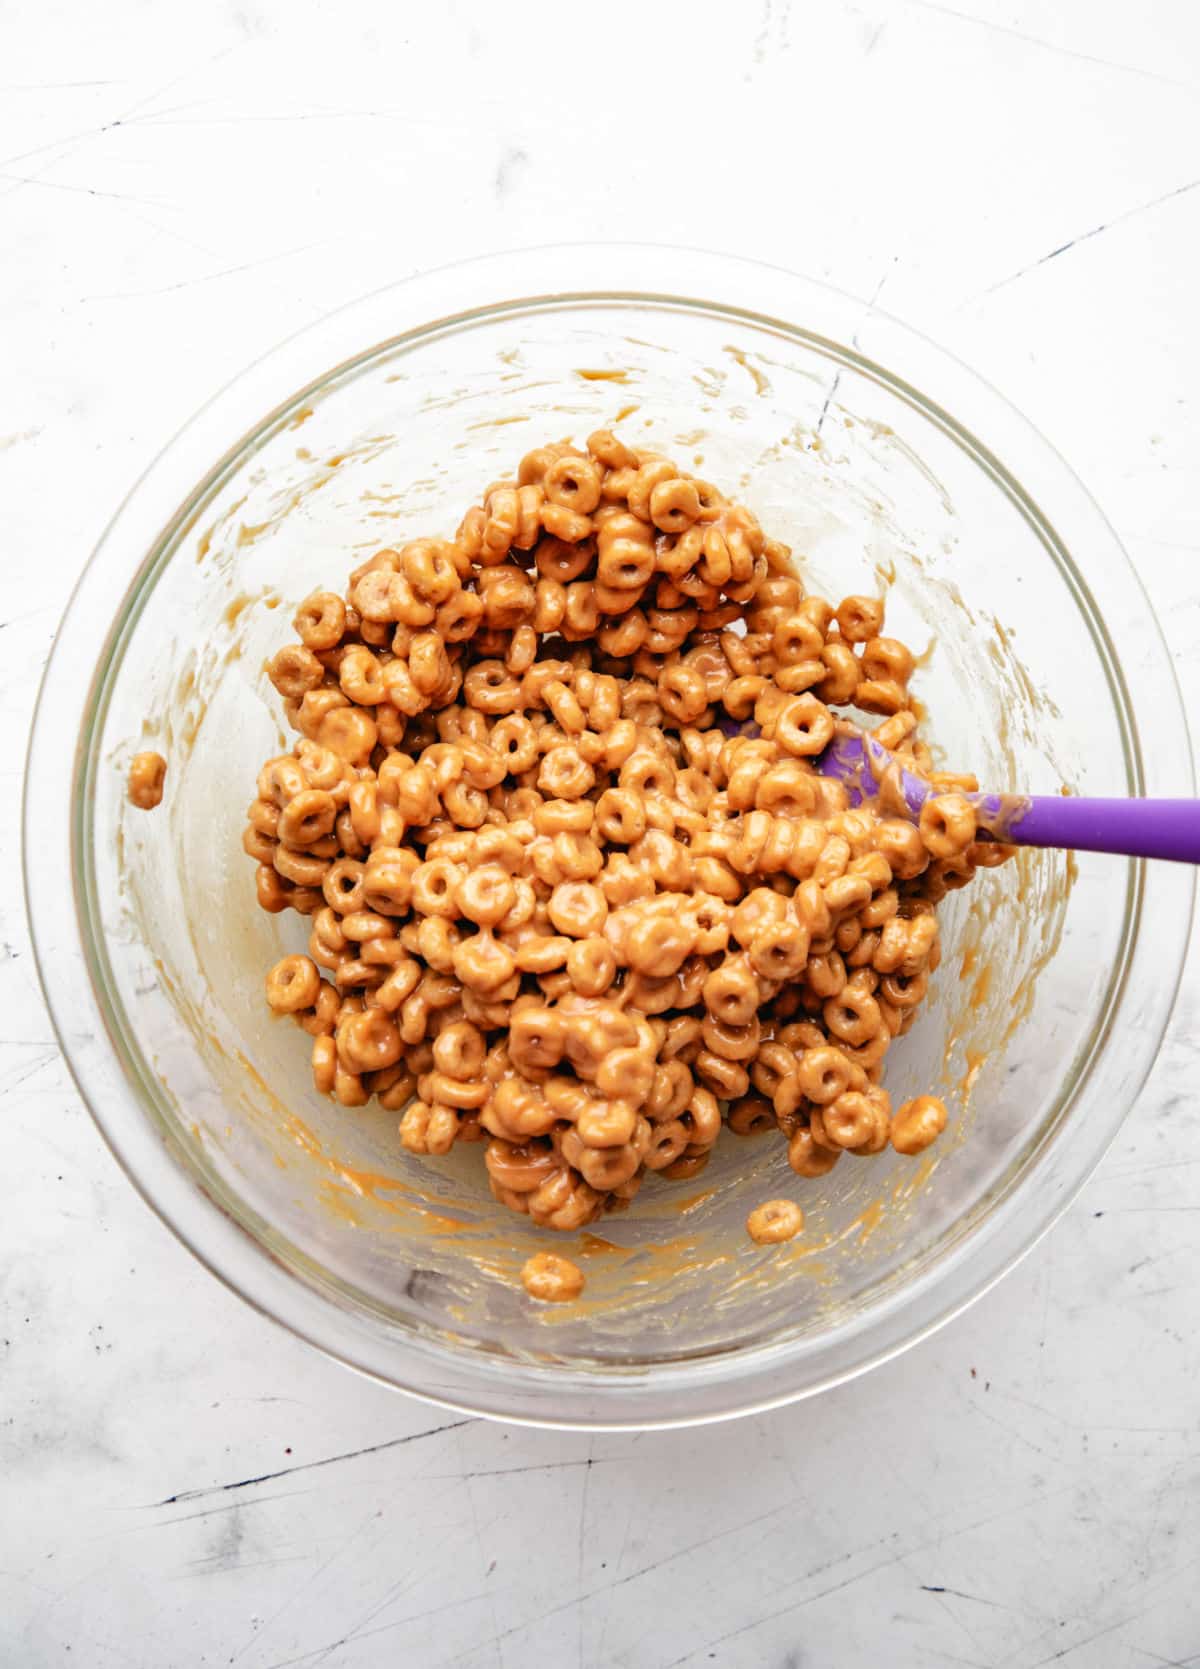 Cheerio cereal coated in honey peanut butter mixture in a glass mixing bowl.